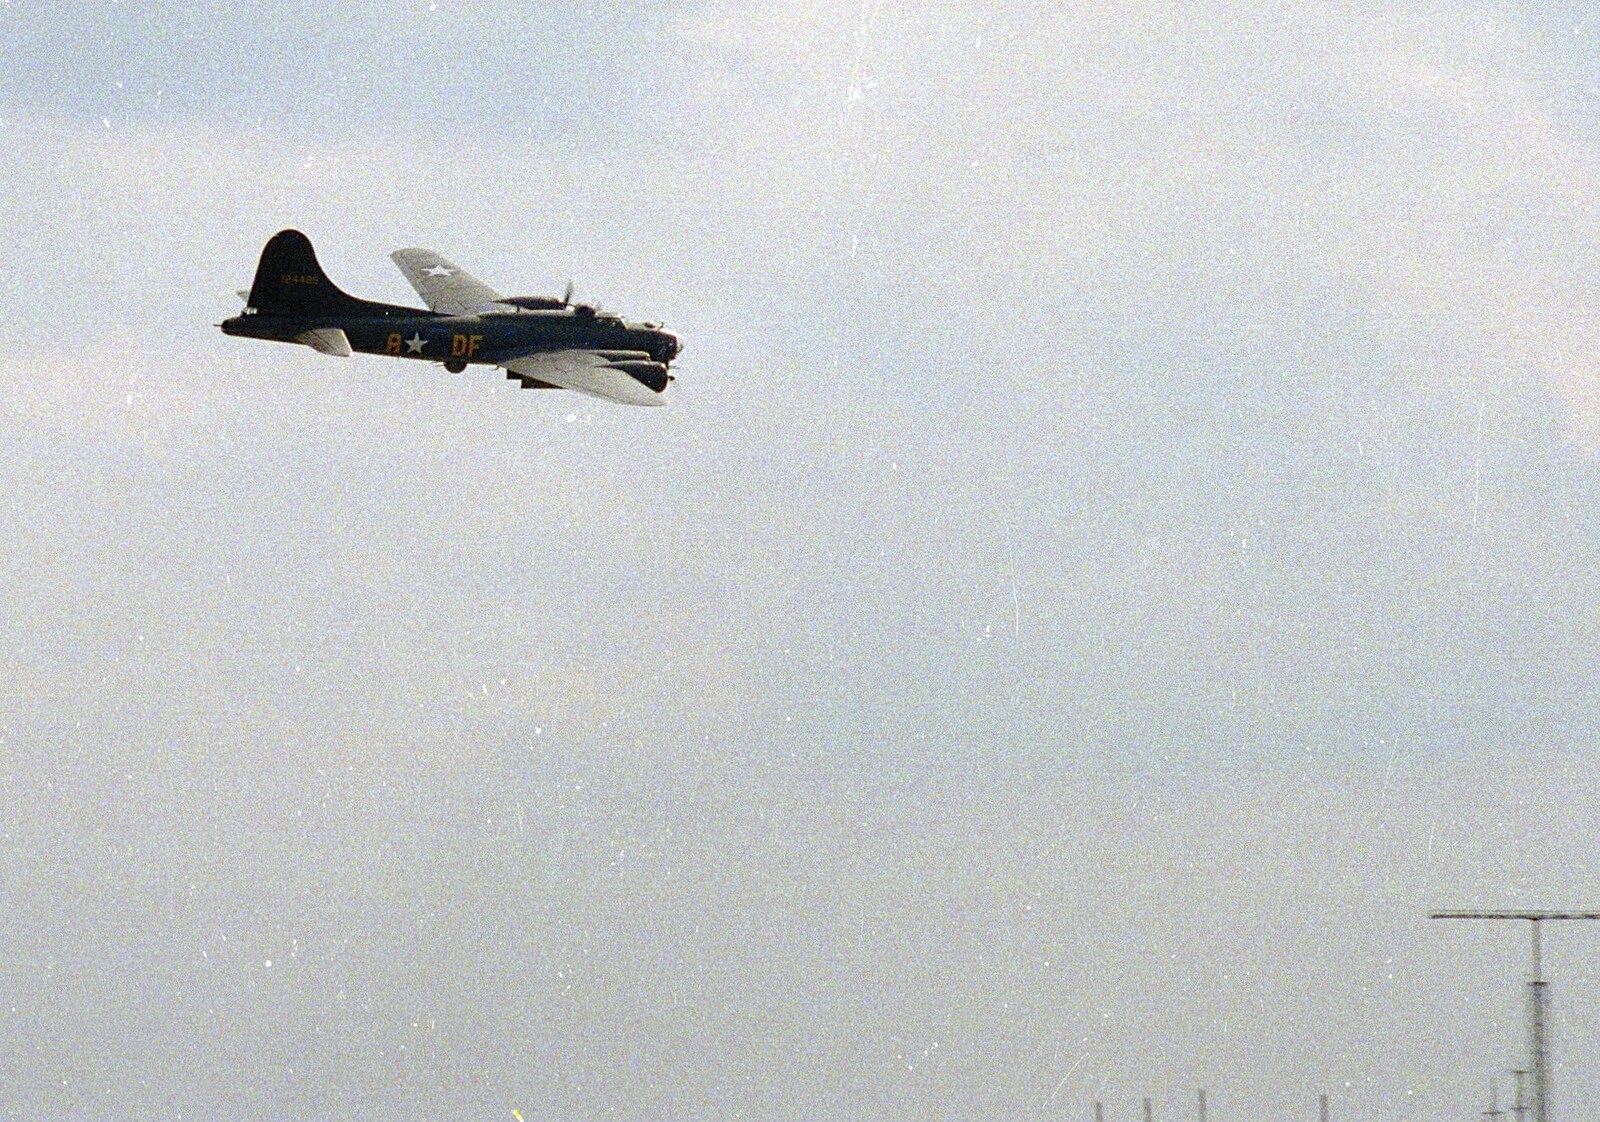 Sally B heads off from The Mildenhall Air Fete, Mildenhall, Suffolk - 29th May 1994